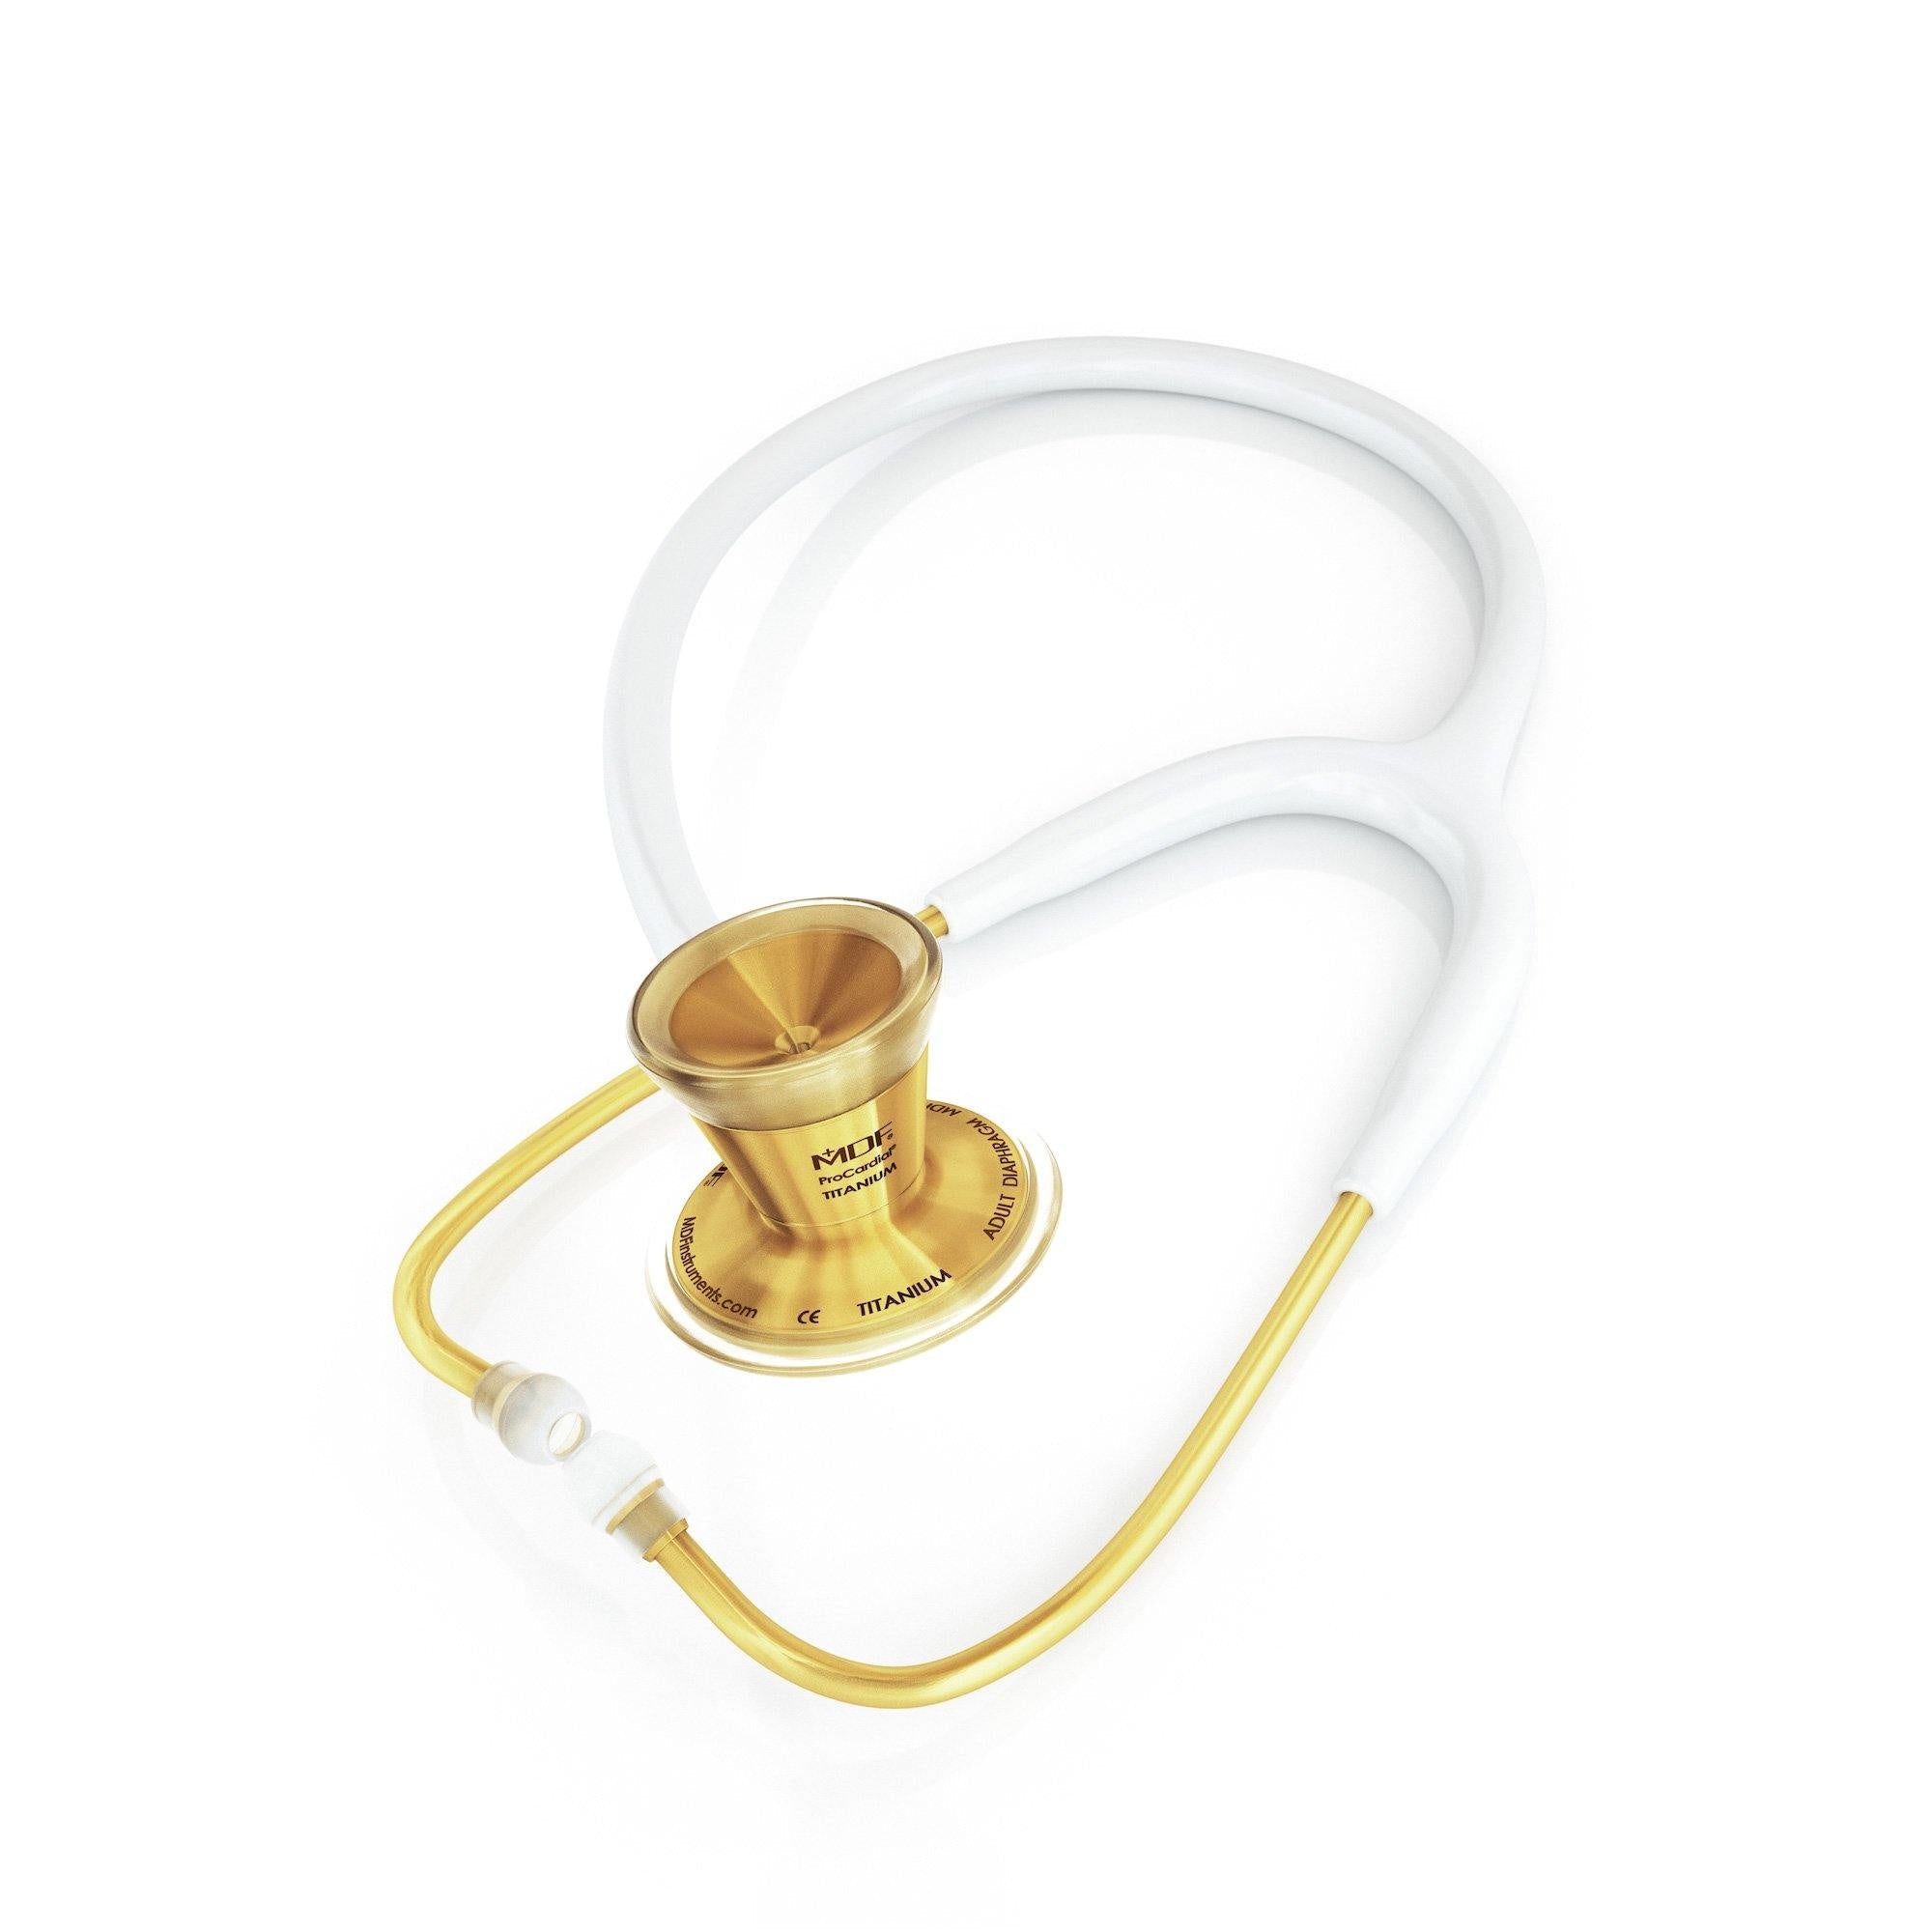 ProCardial® Titanium Cardiology Stethoscope - White/Gold - MDF Instruments Official Store - Stethoscope